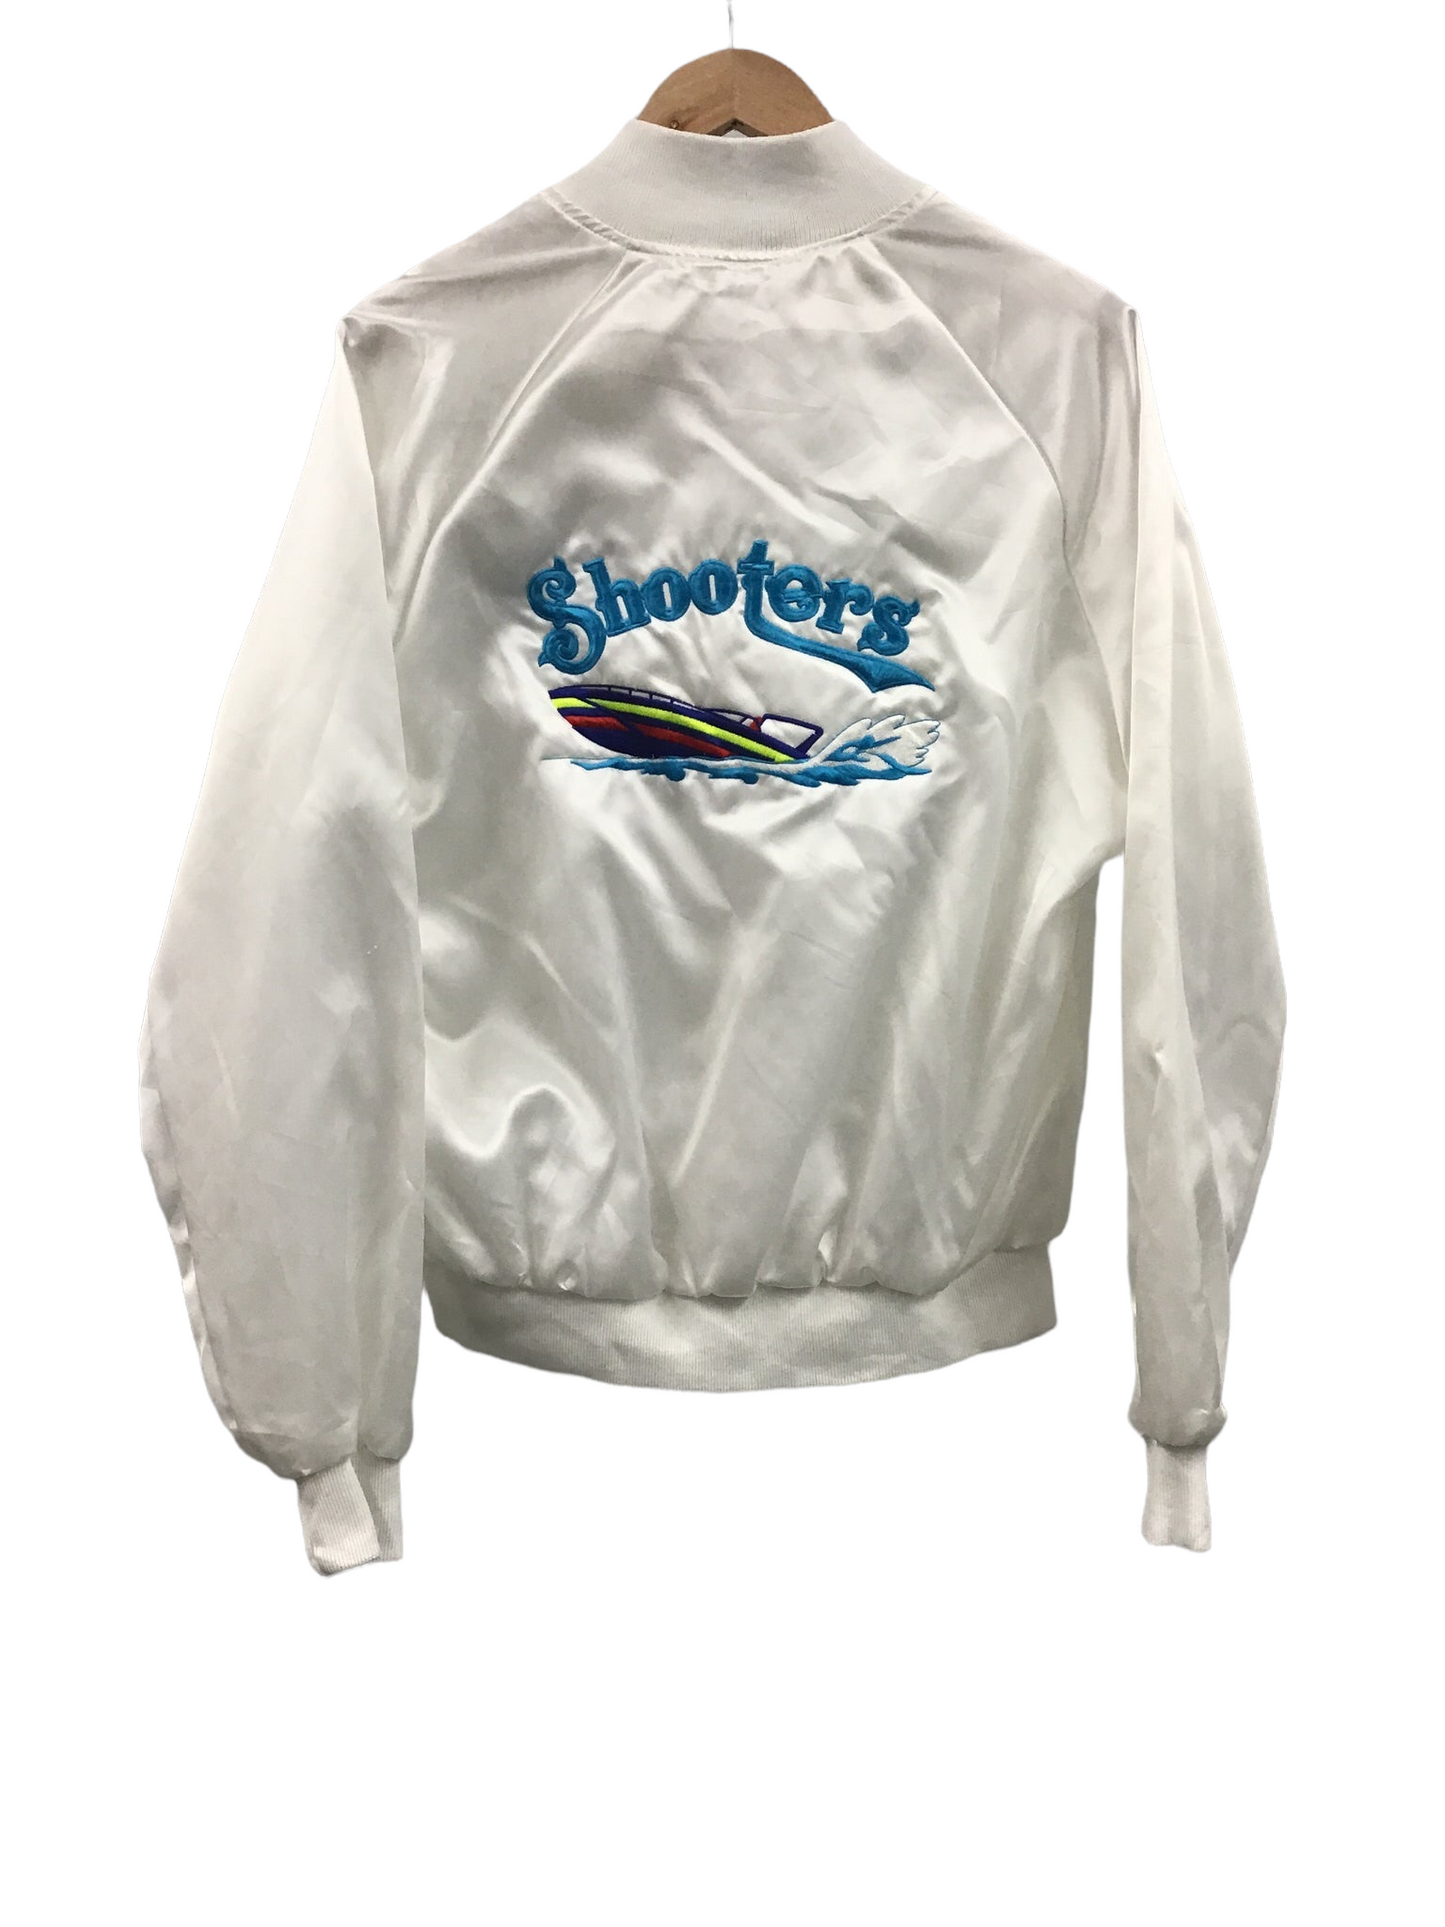 Shooters Fort Lauderdale (Size L)